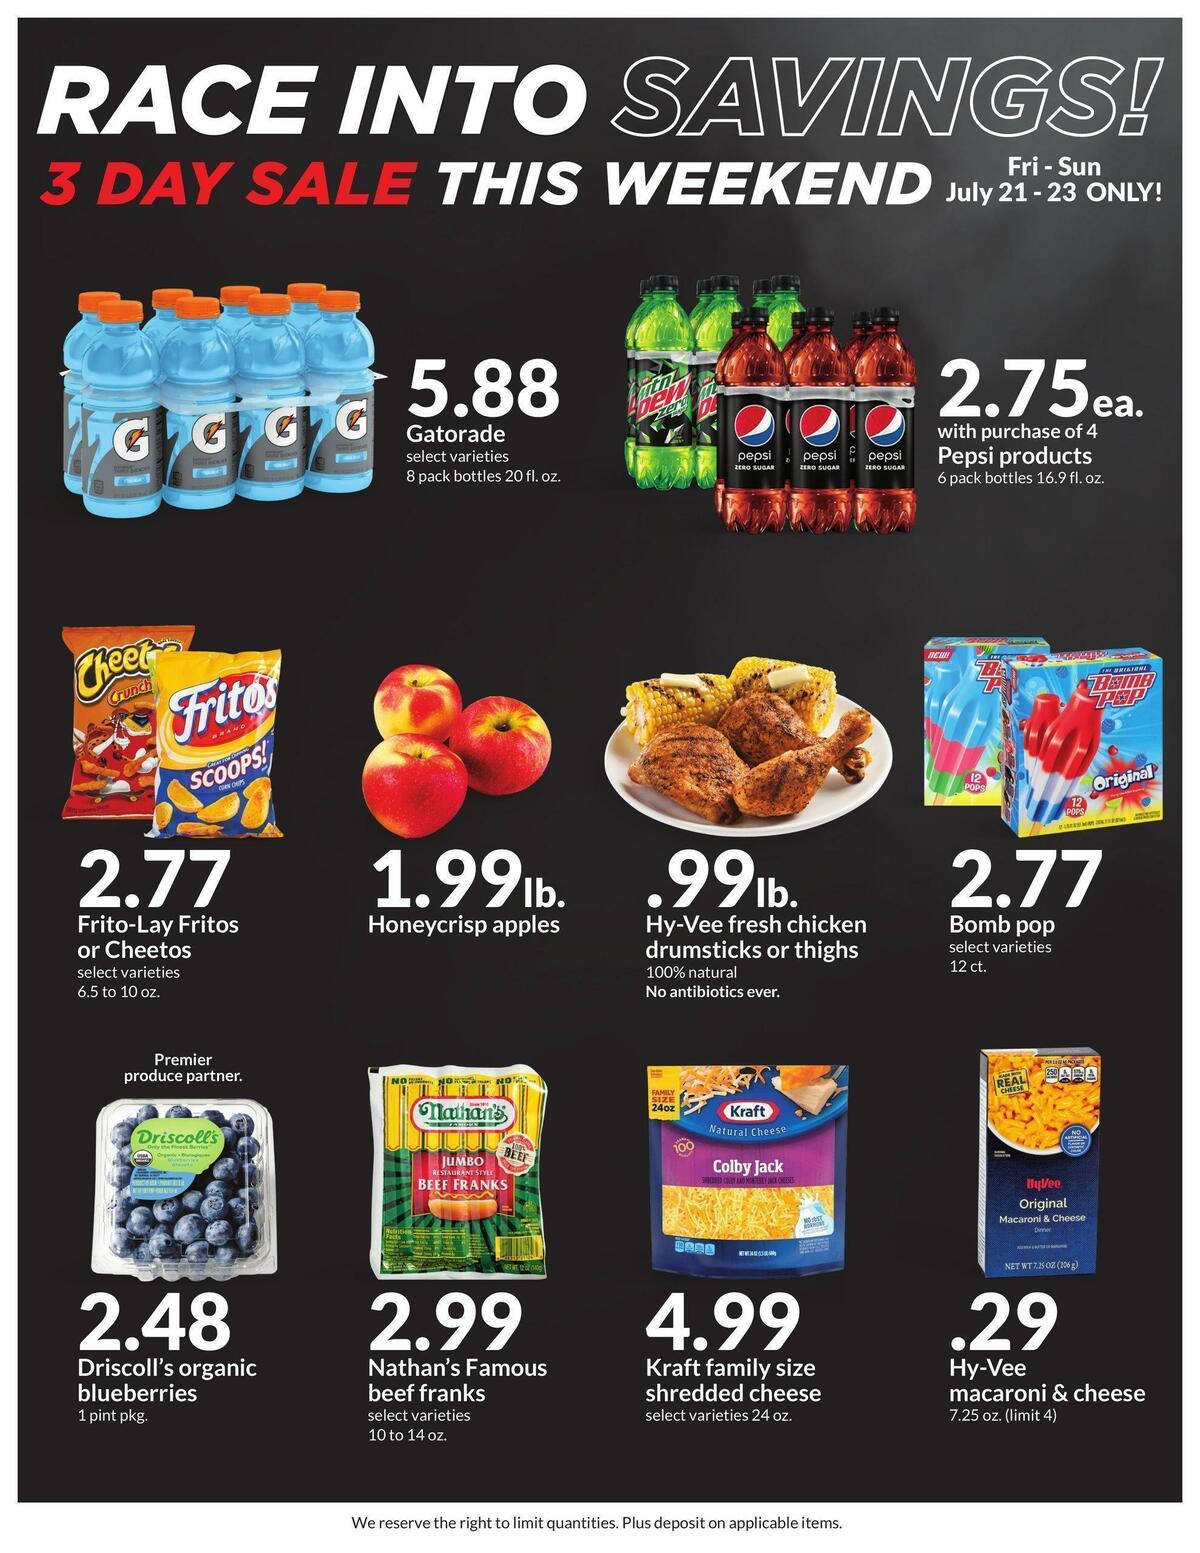 HyVee 3 Day Sale Deals & Ads from July 21